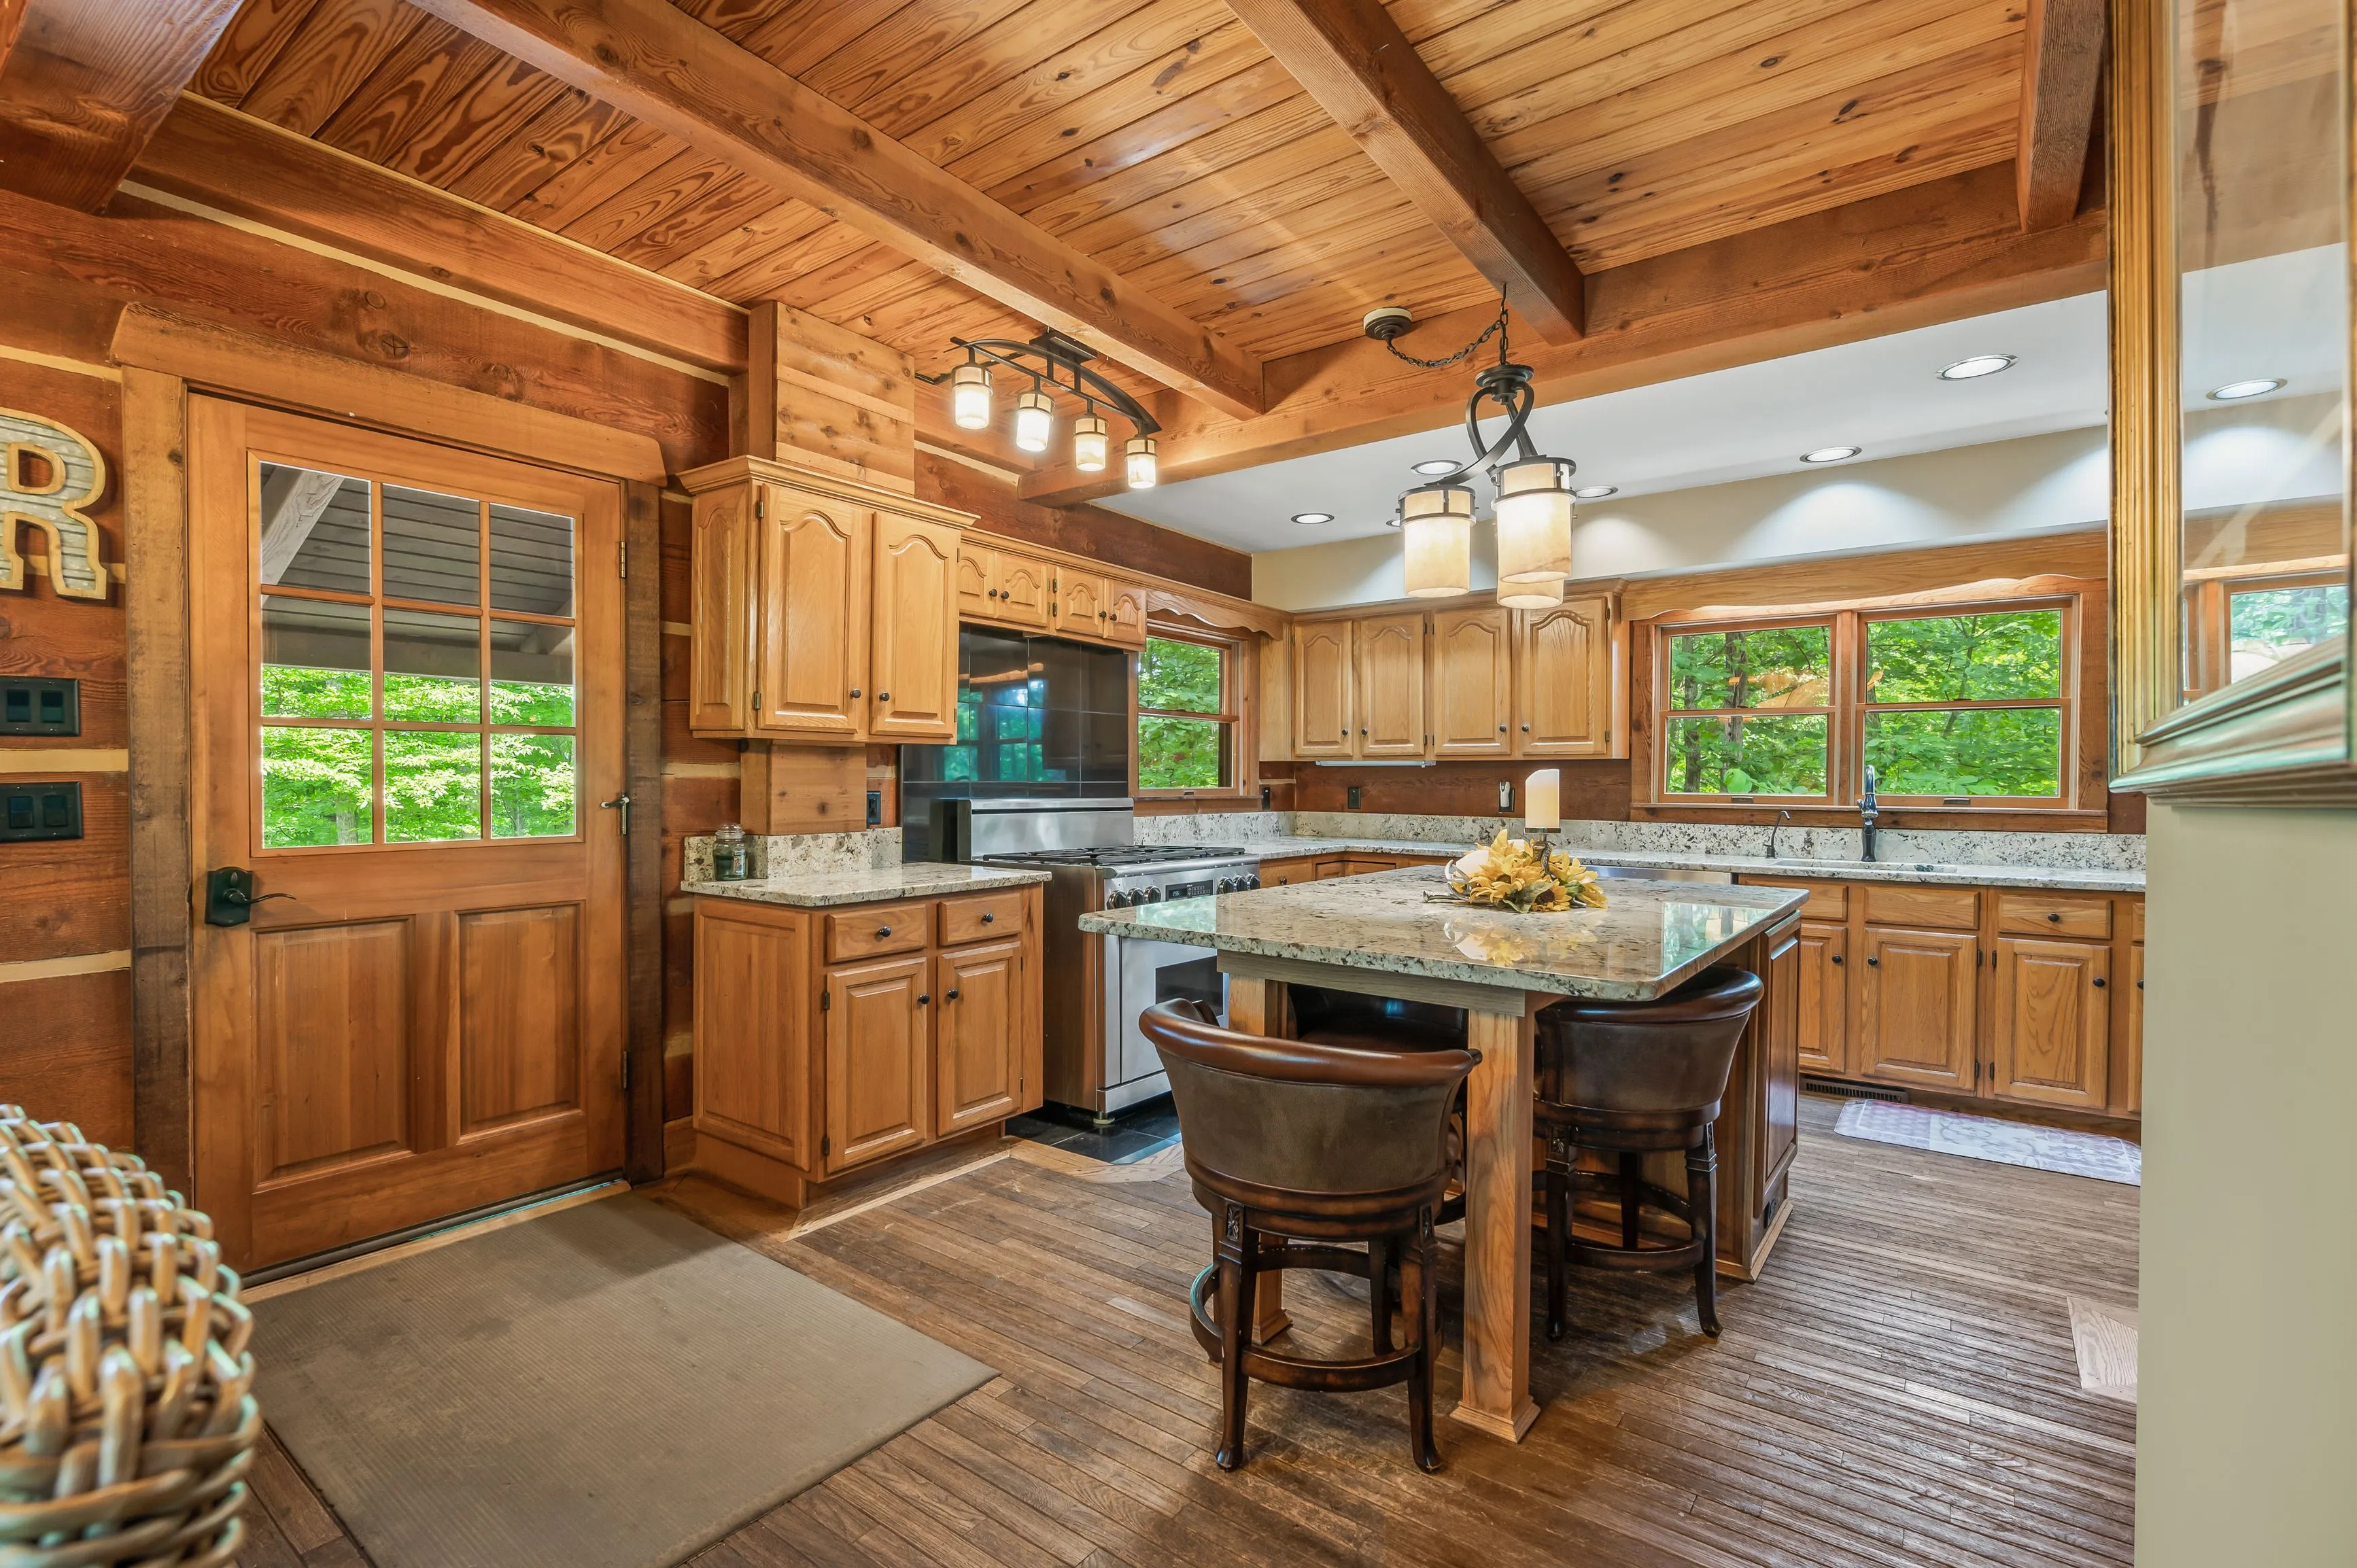 Spacious kitchen interior with wooden cabinets, granite countertops, and a central island with bar stools, under exposed wooden beams and modern lighting fixtures.